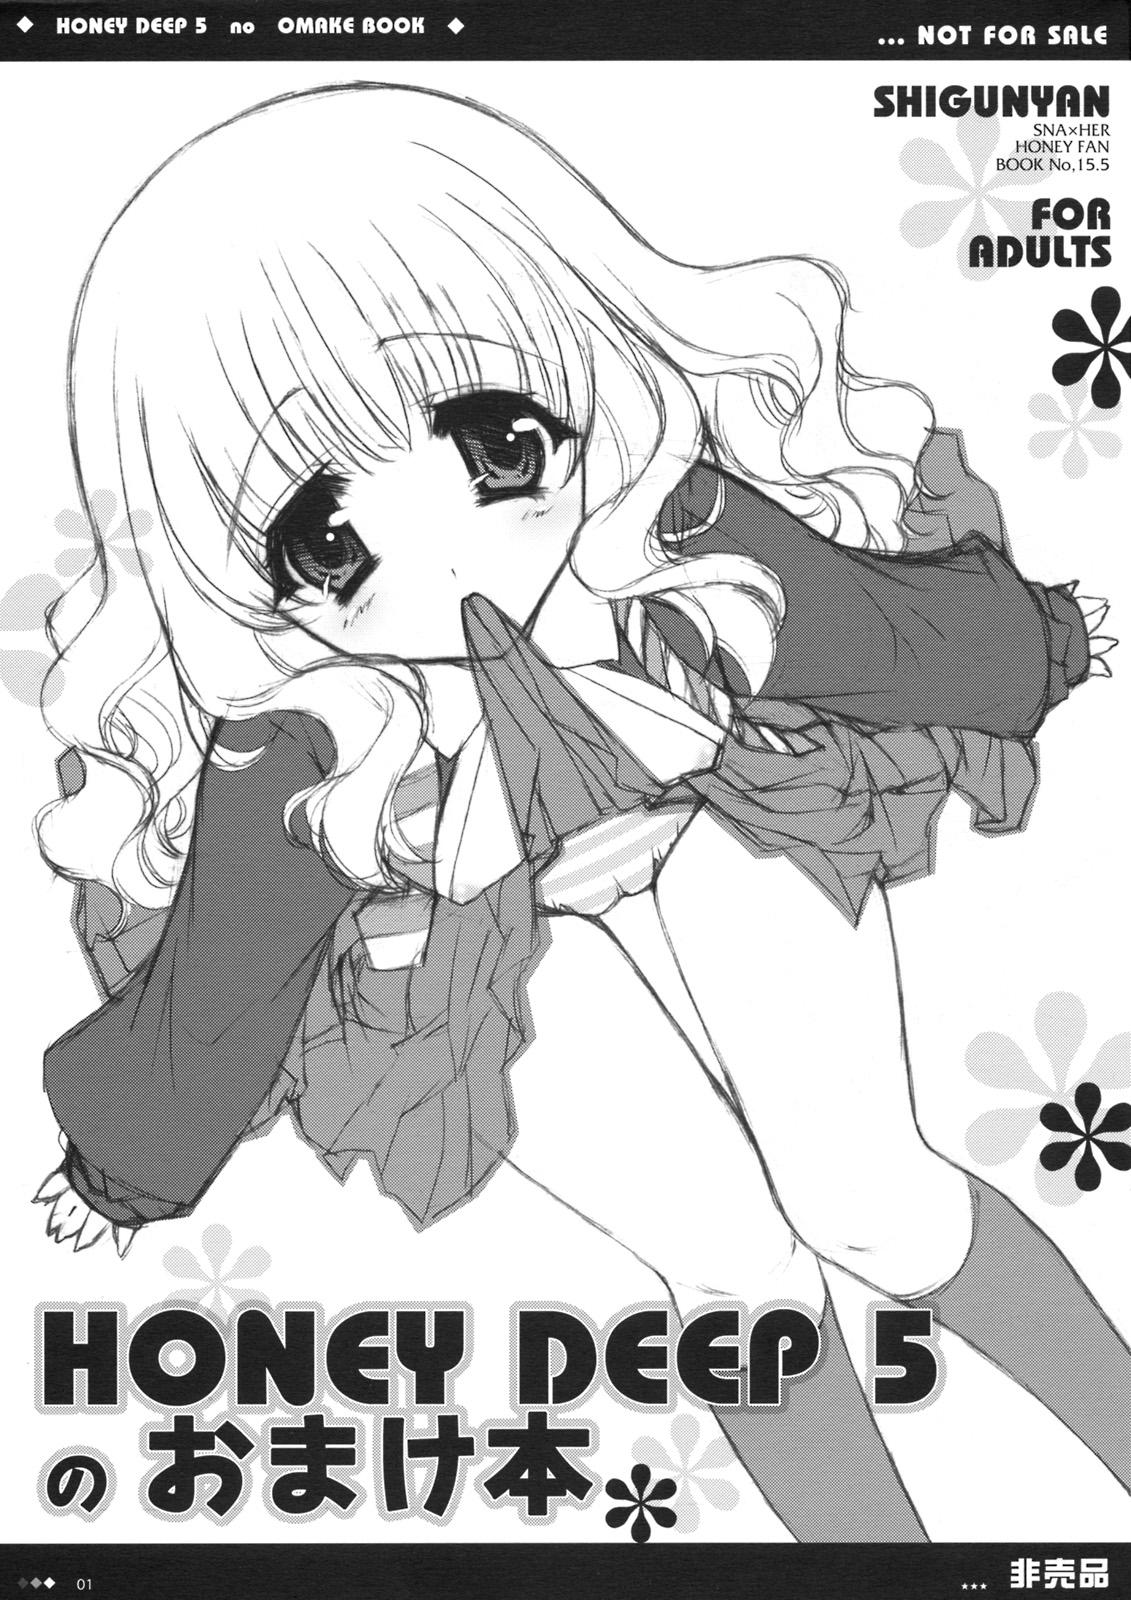 Head HONEY DEEP 5 no Omake Hon - Harry potter Squirters - Picture 1